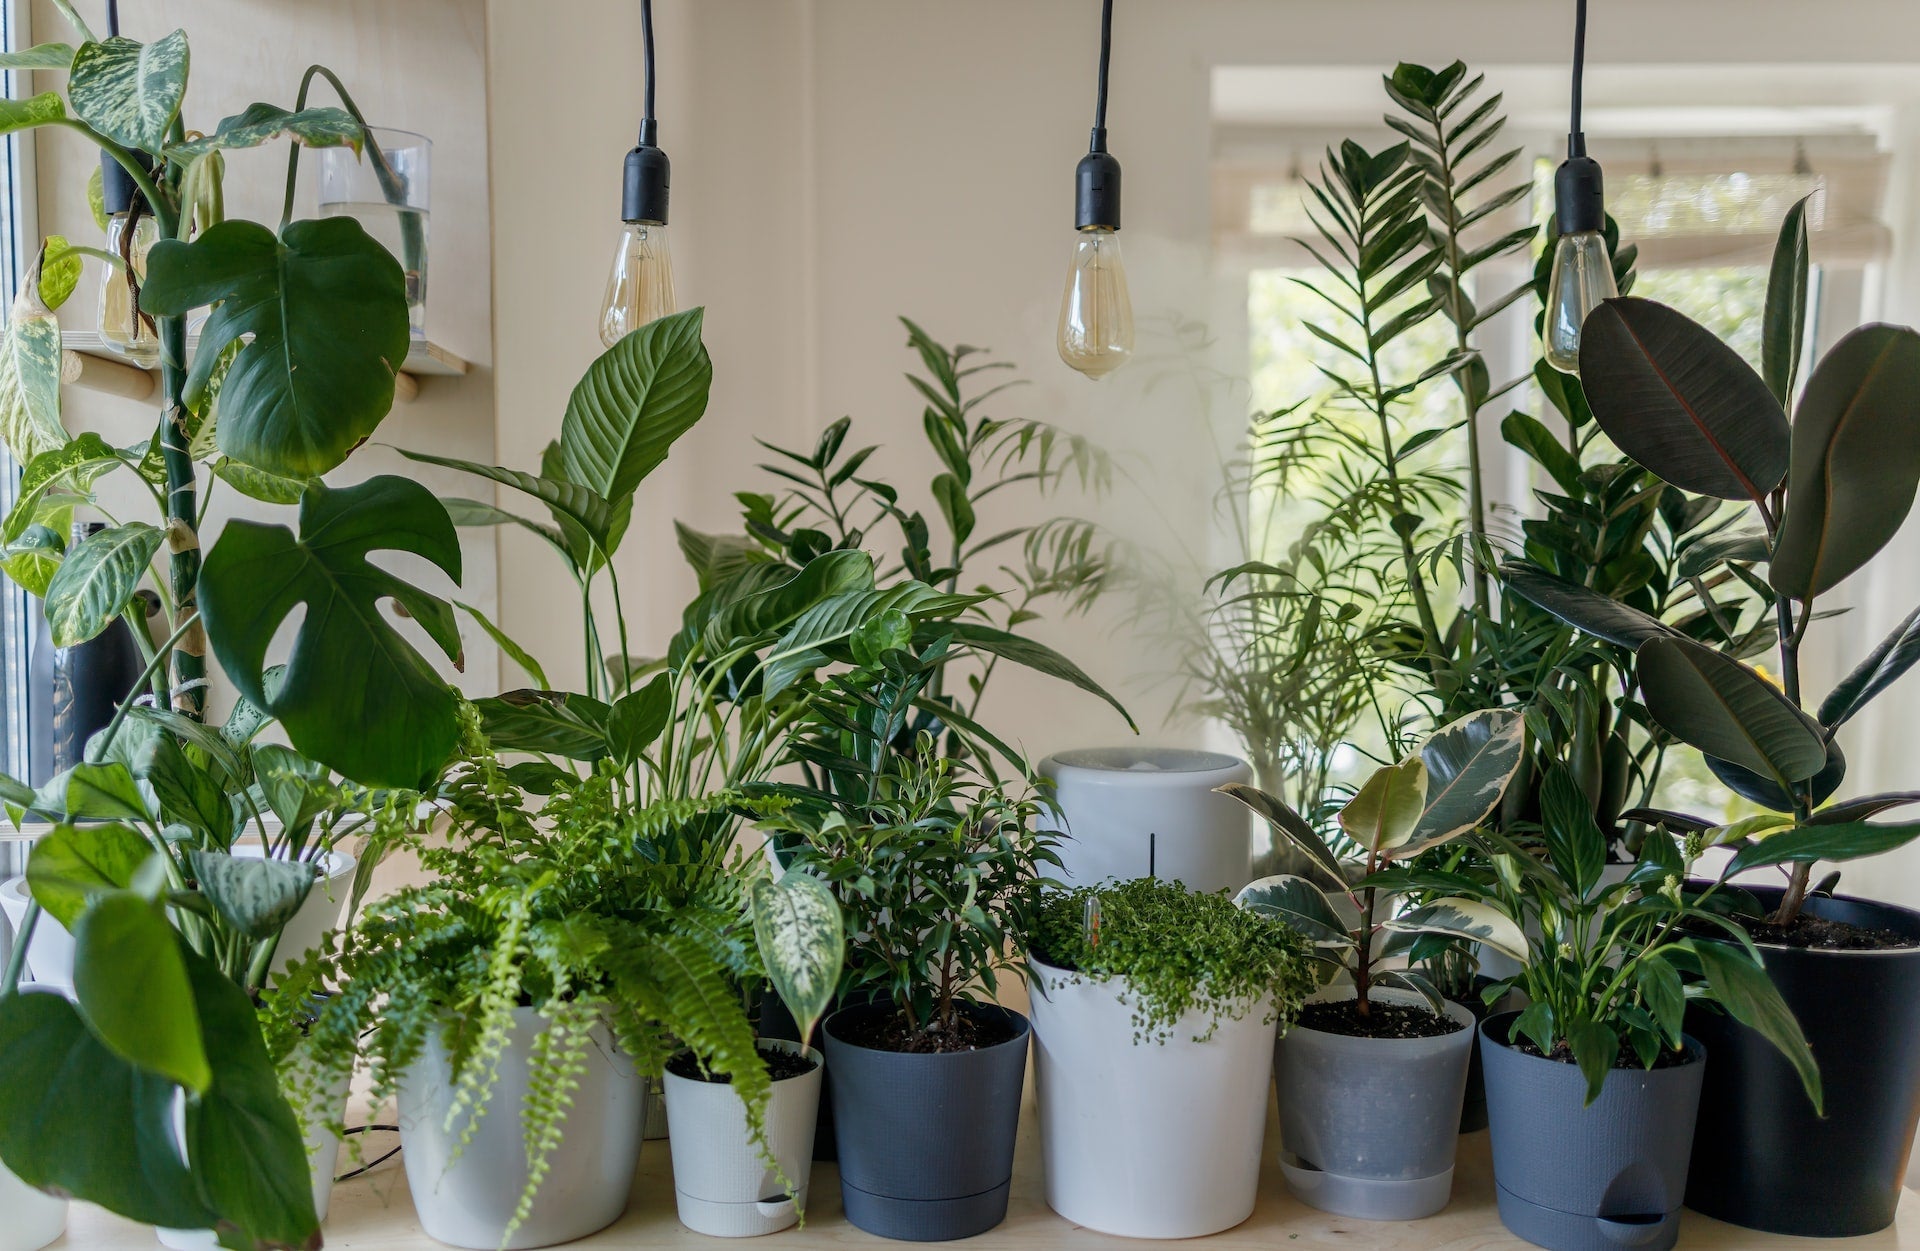 Top 5 Plants to Keep Your Home Tropical During the Winter Season